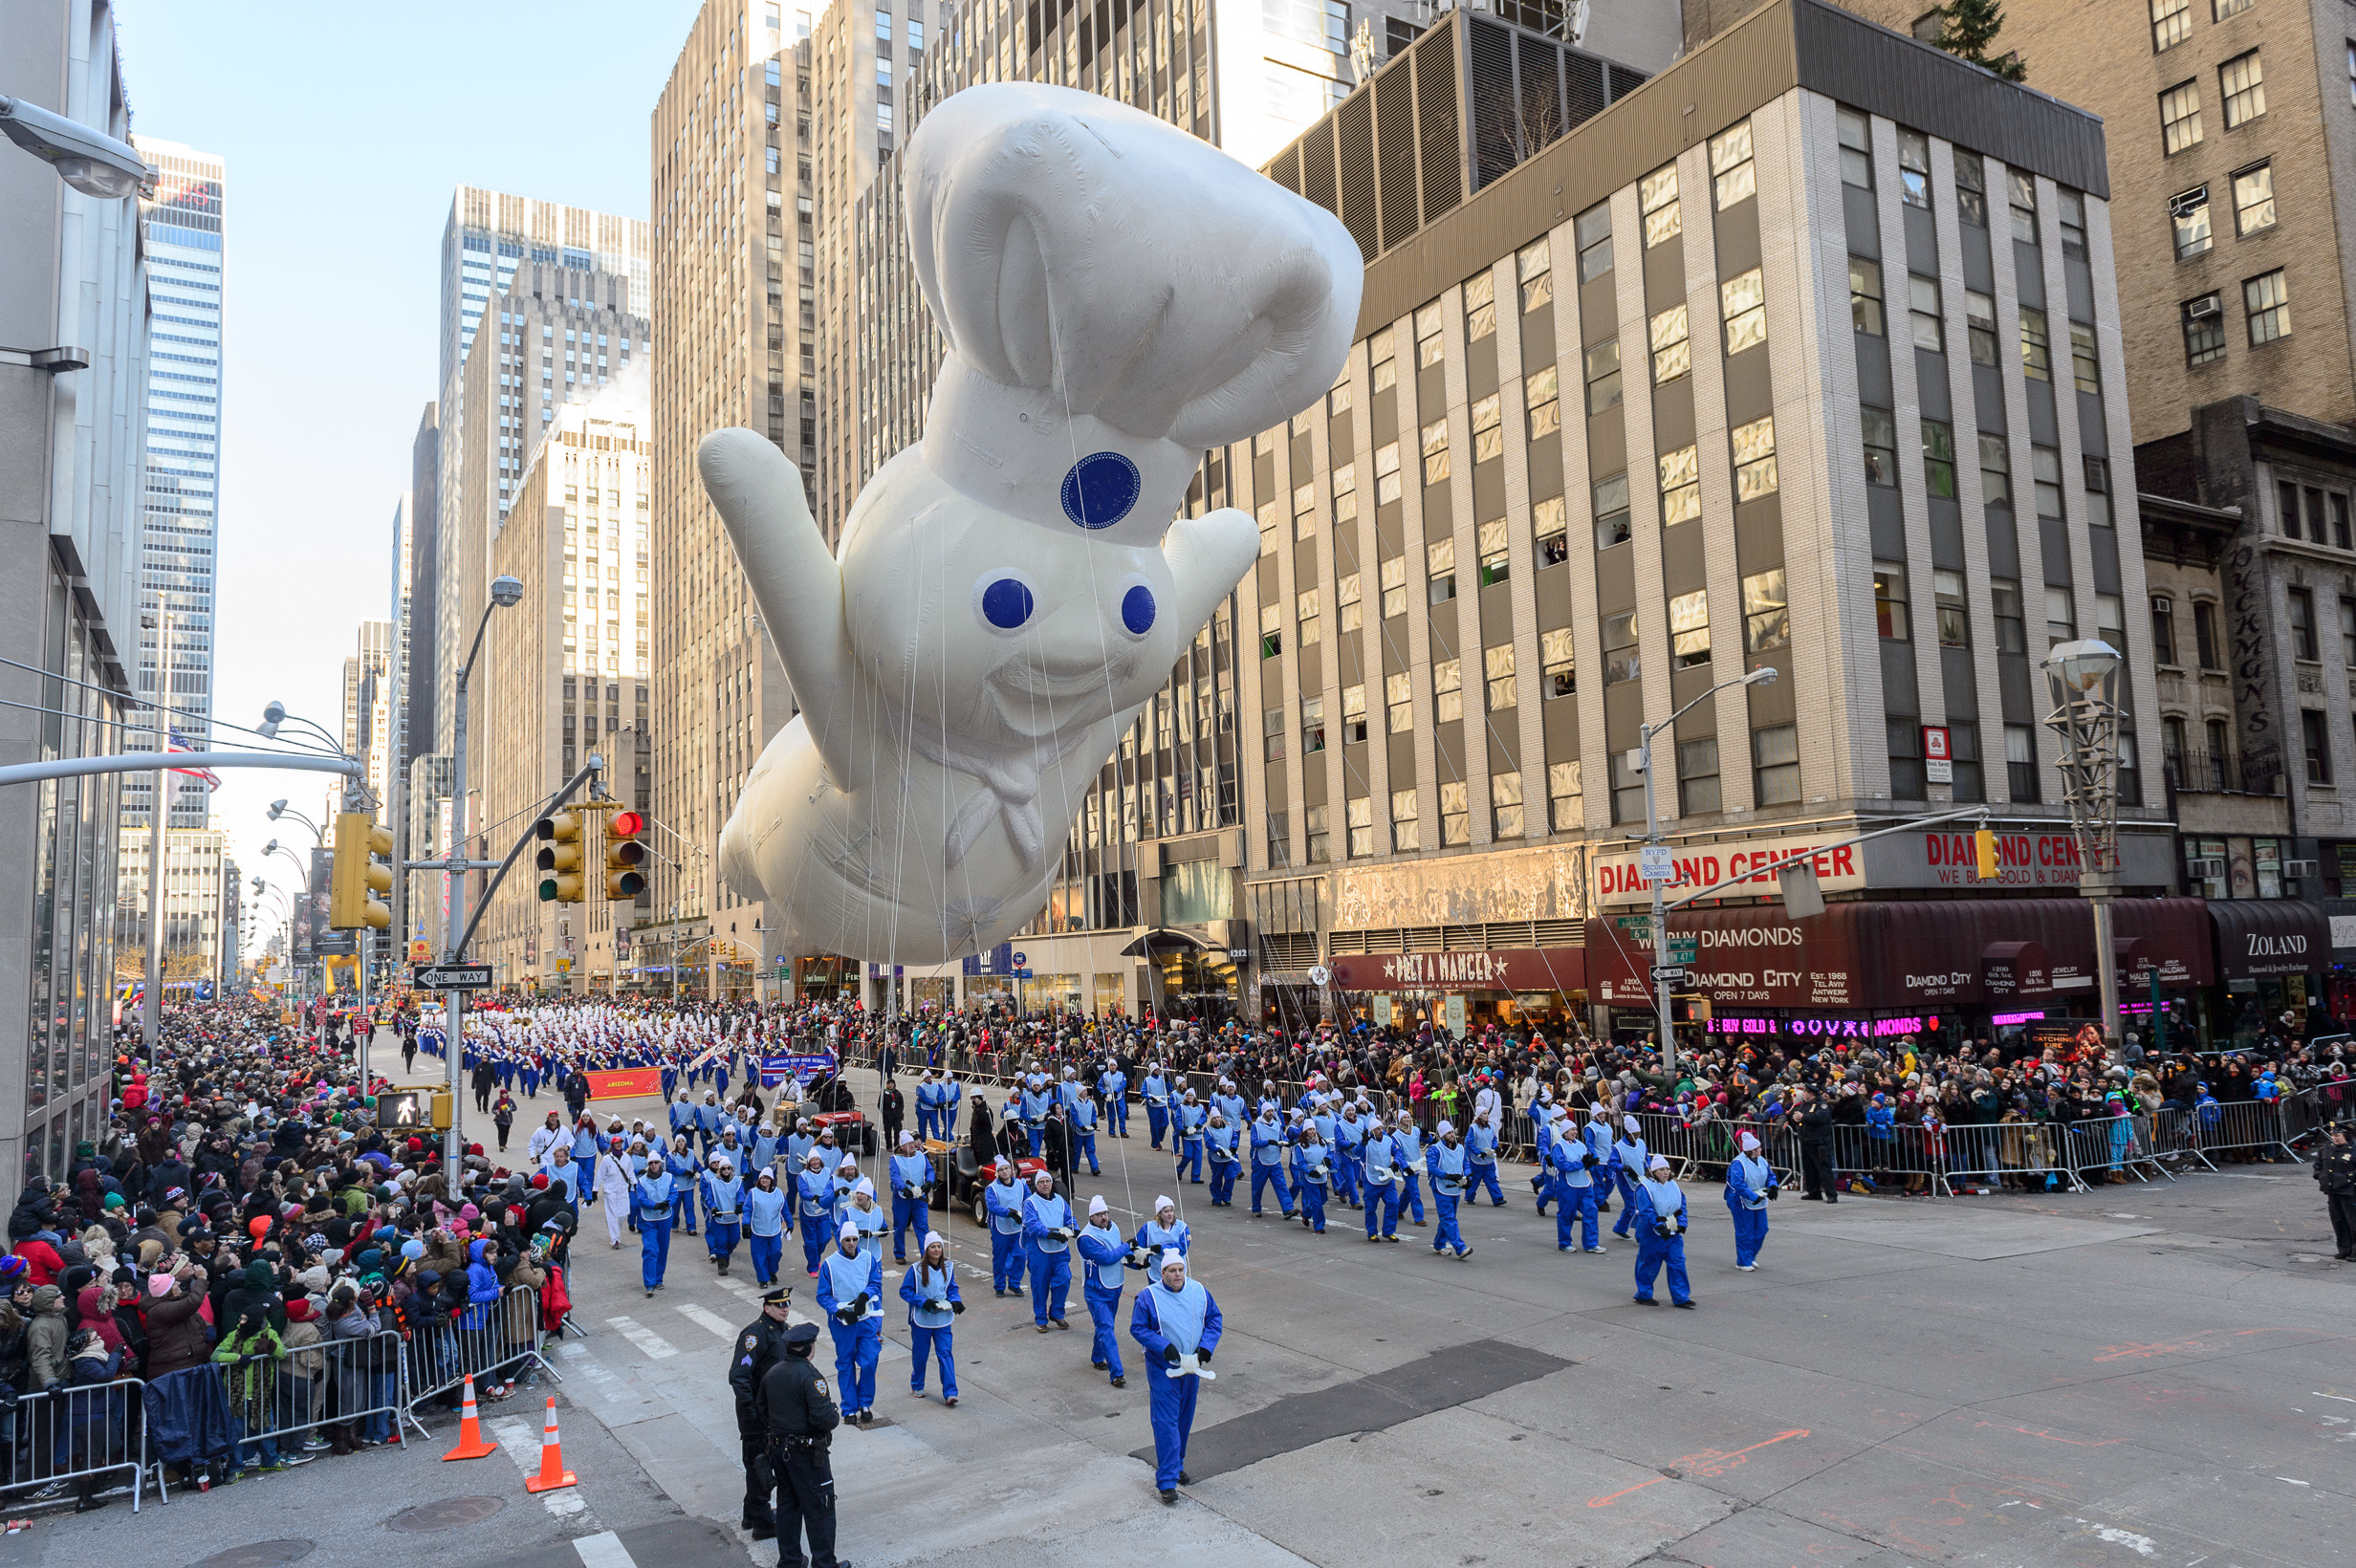 Macy's Thanksgiving Day Parade 2016 guide including where to watch